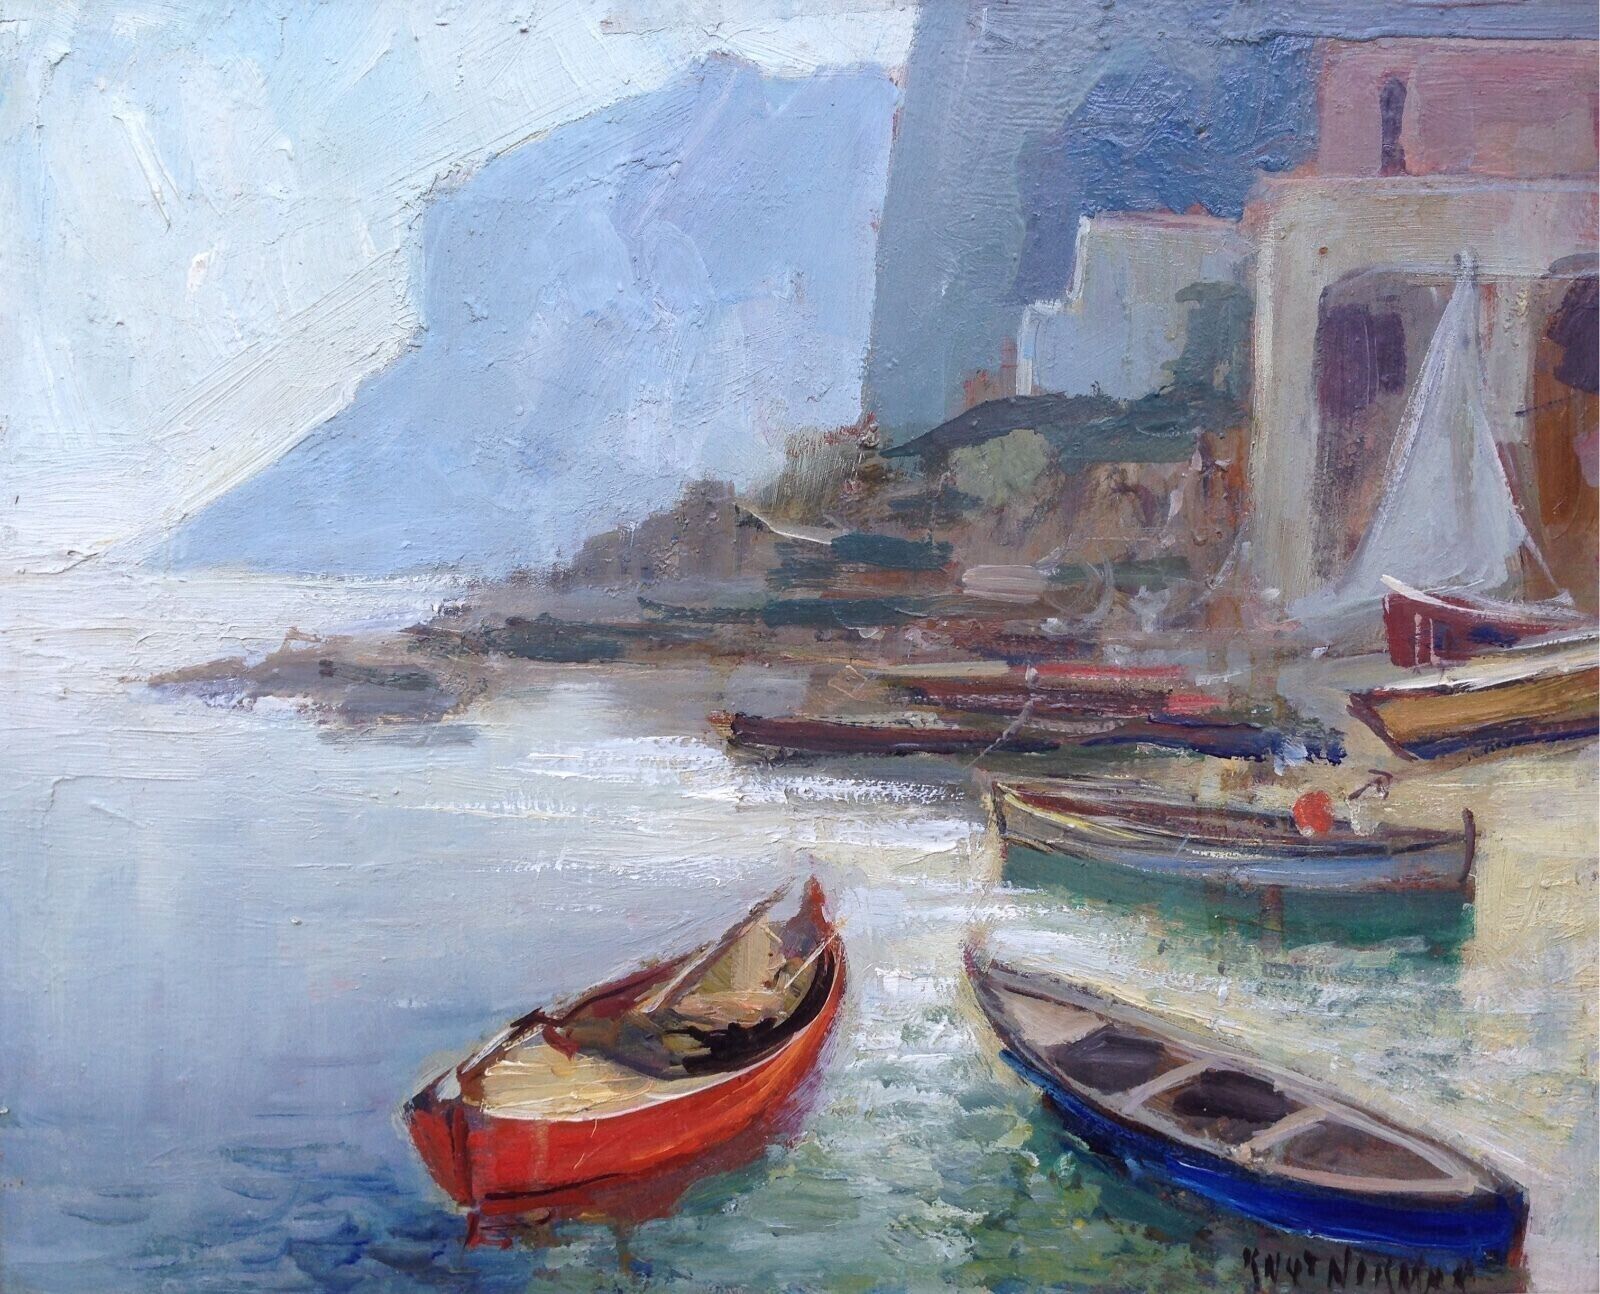 Knut Norman (1896-1977): BOATS IN A ROCKY COAST COVE Beautiful painting listed